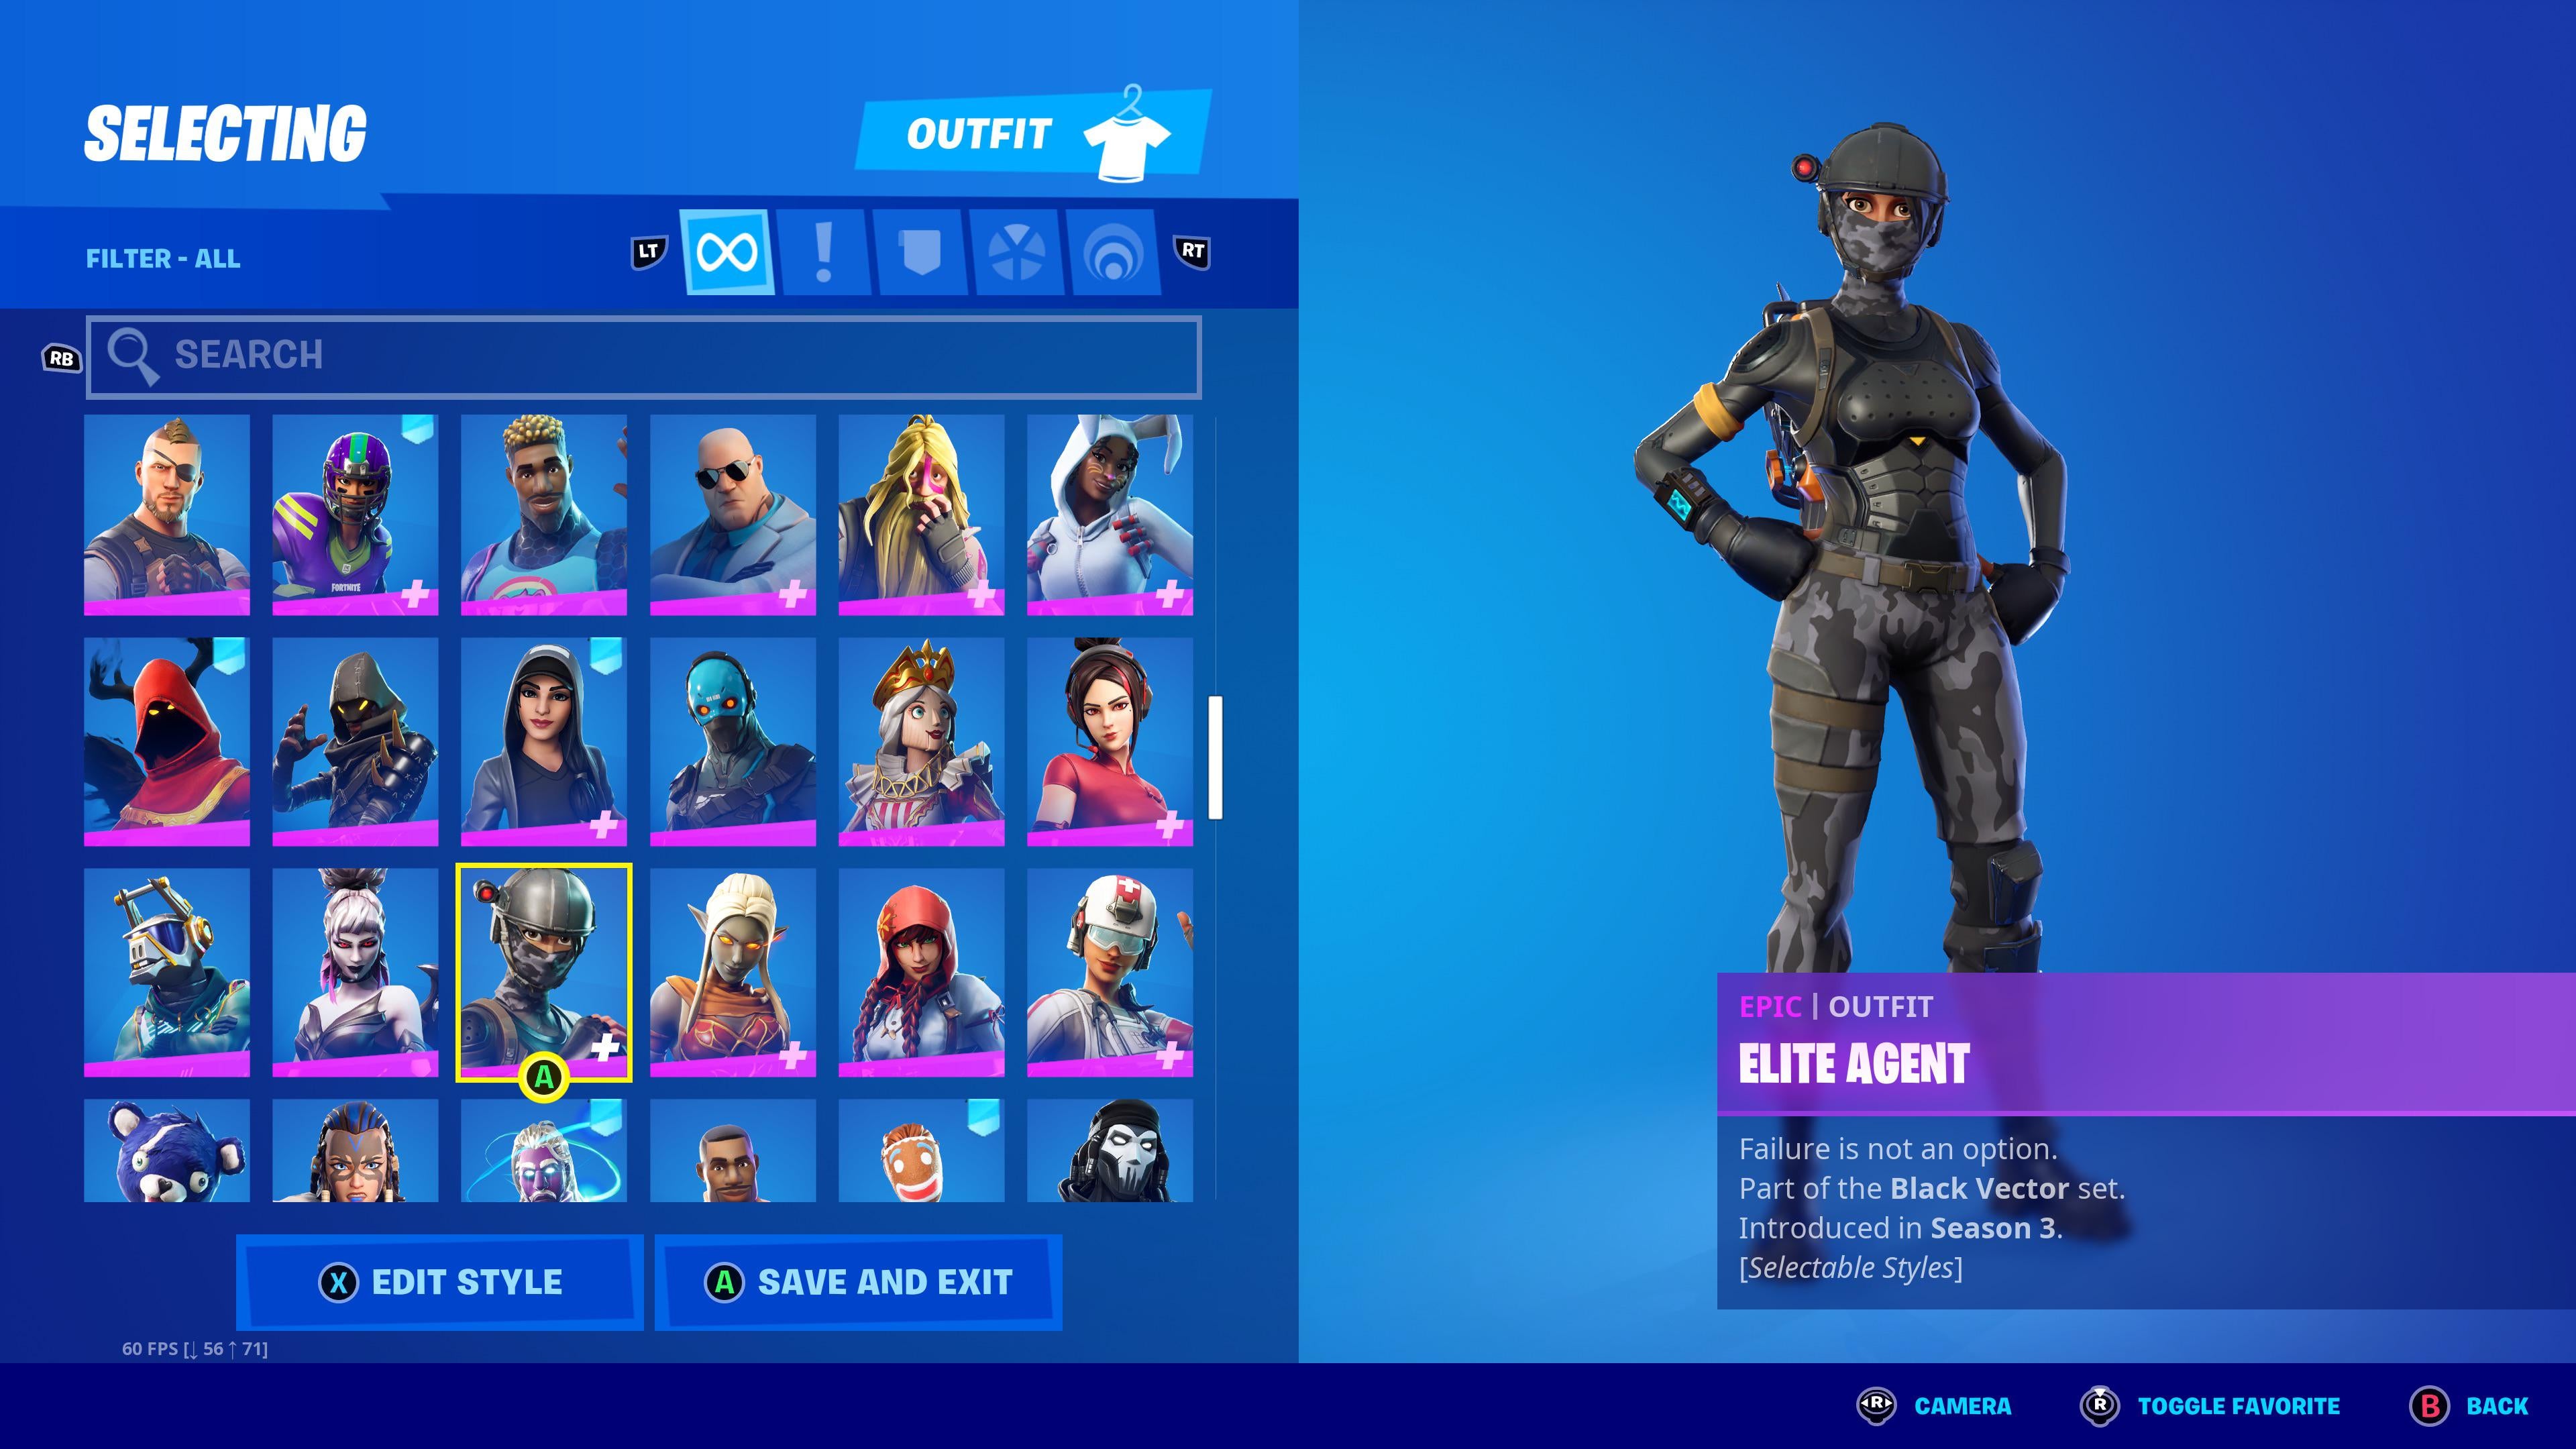 Stalked Fortnite Accounts Selling Super Stacked Fortnite Account Full Access Epicnpc Marketplace